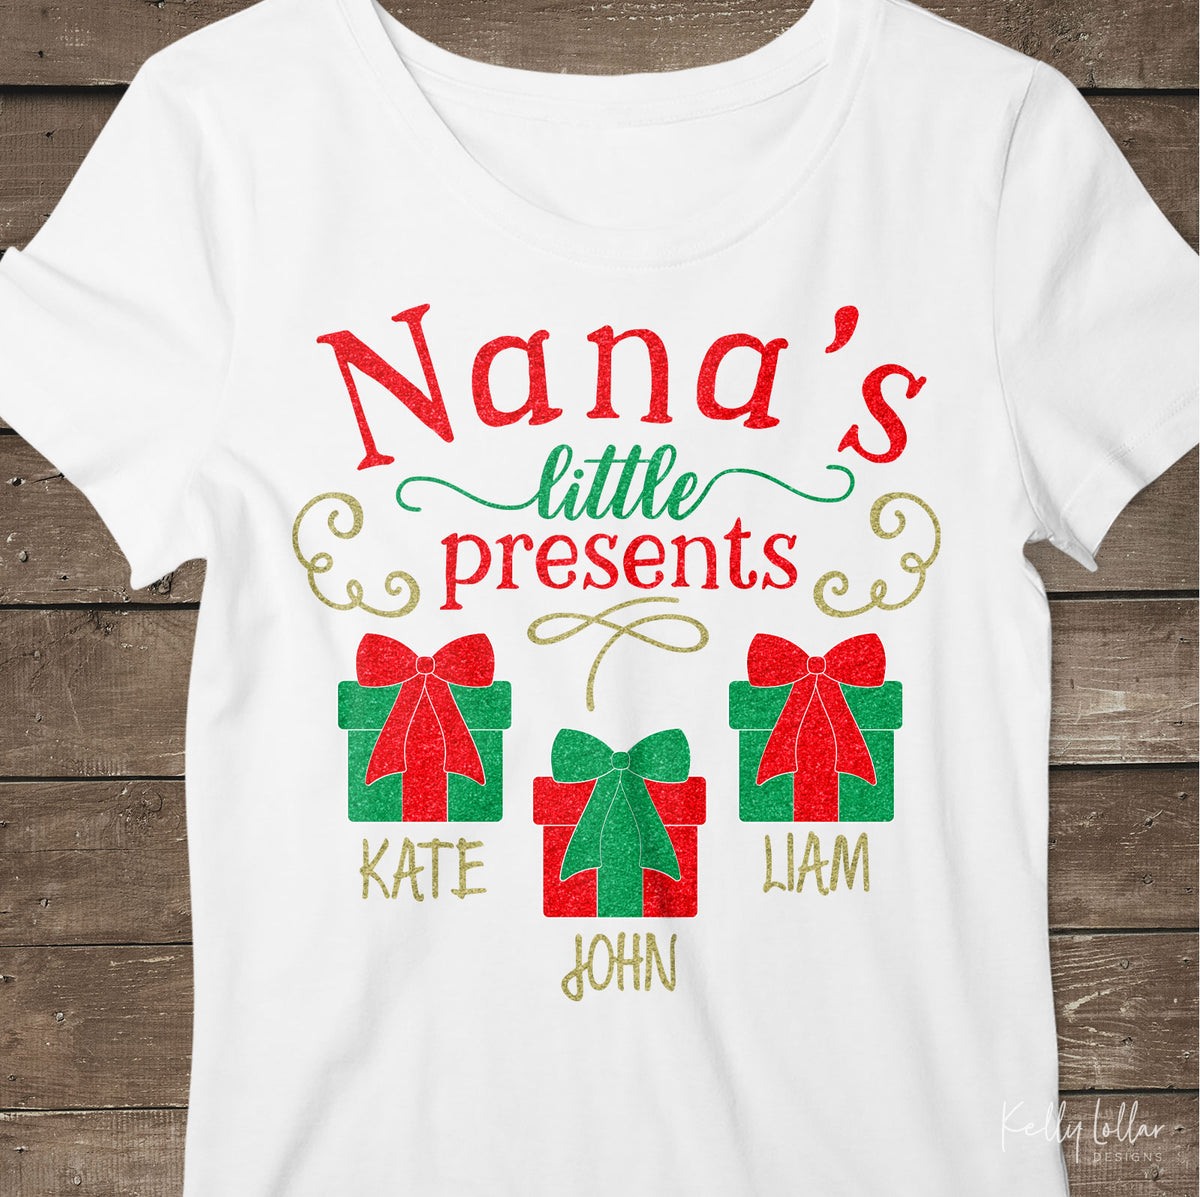 Nana&#39;s Little Presents| Christmas Shirt Design for Nana with Gift Boxes for Children&#39;s Names | SVG DXF PNG Cut Files